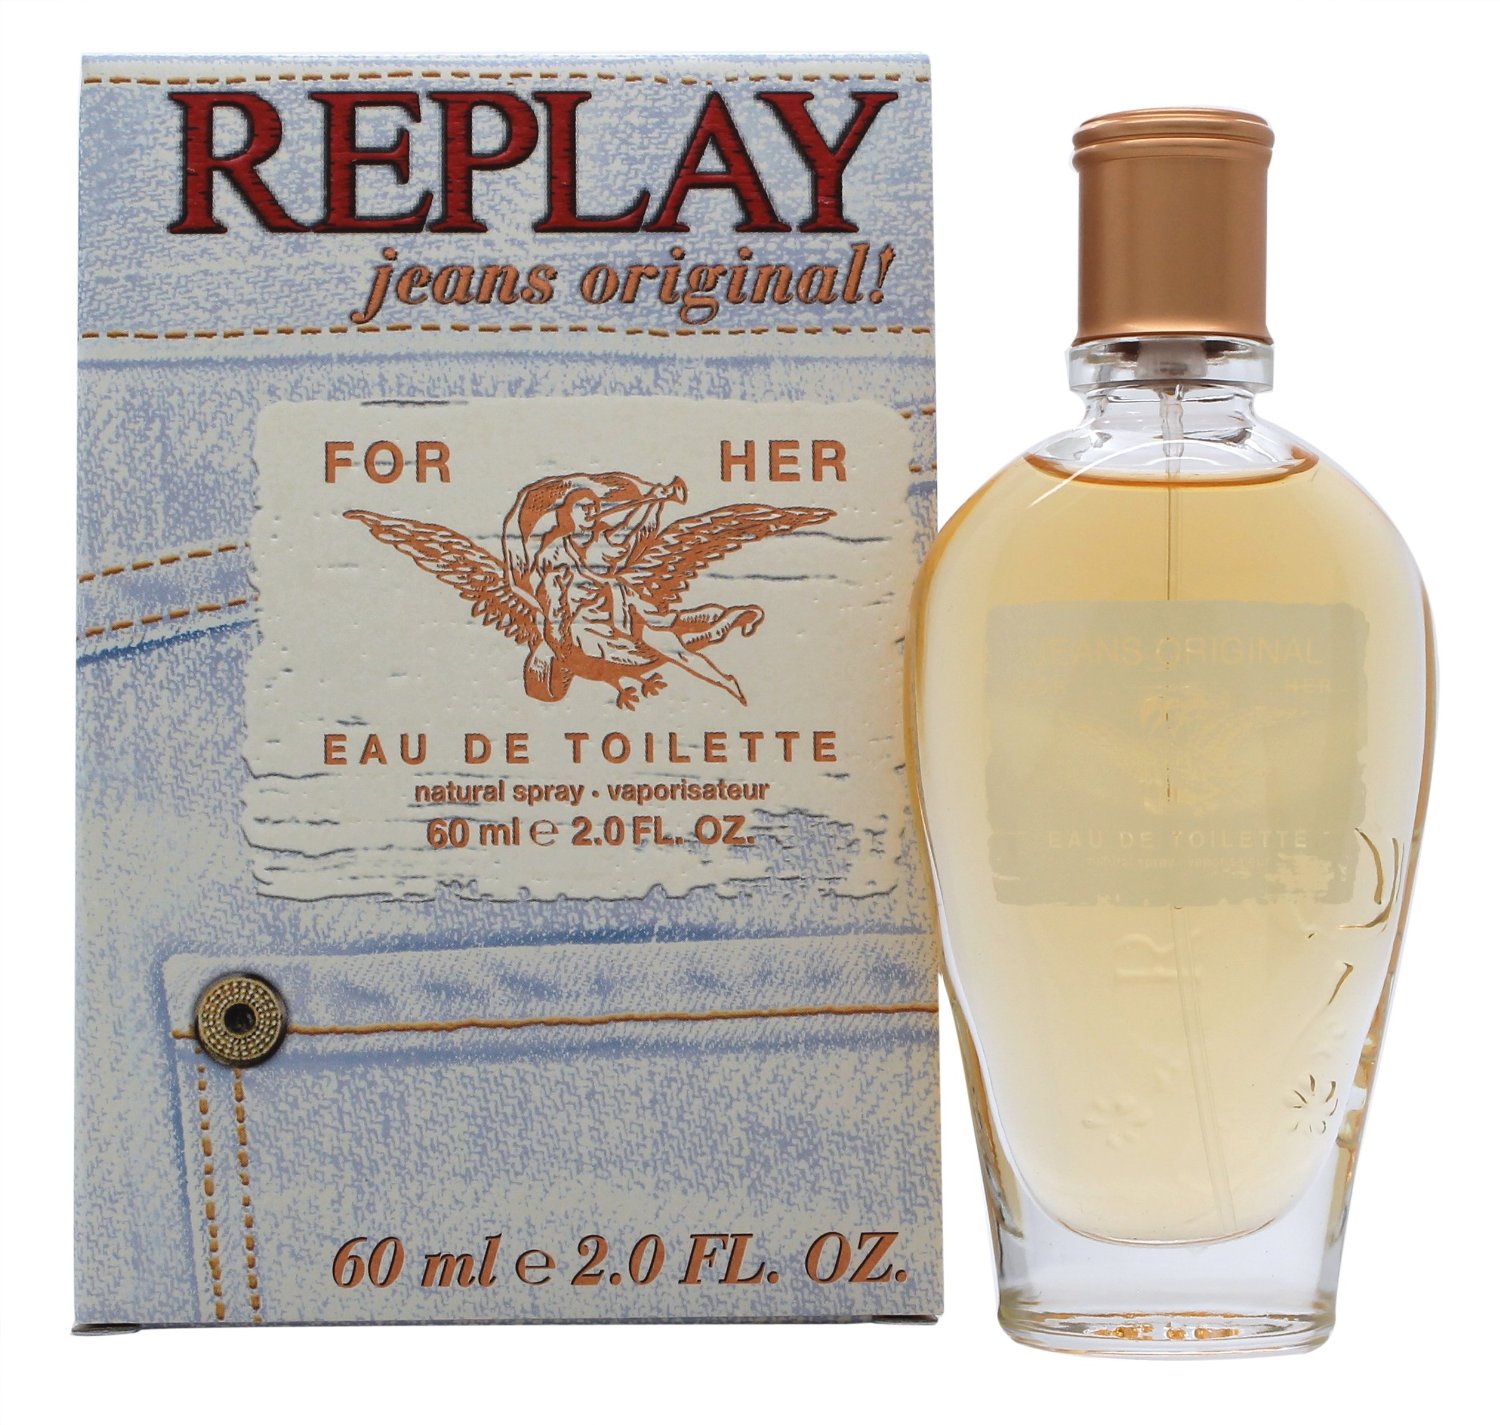 REPLAY JEANS ORIGINAL FOR HER EDT 60 ML